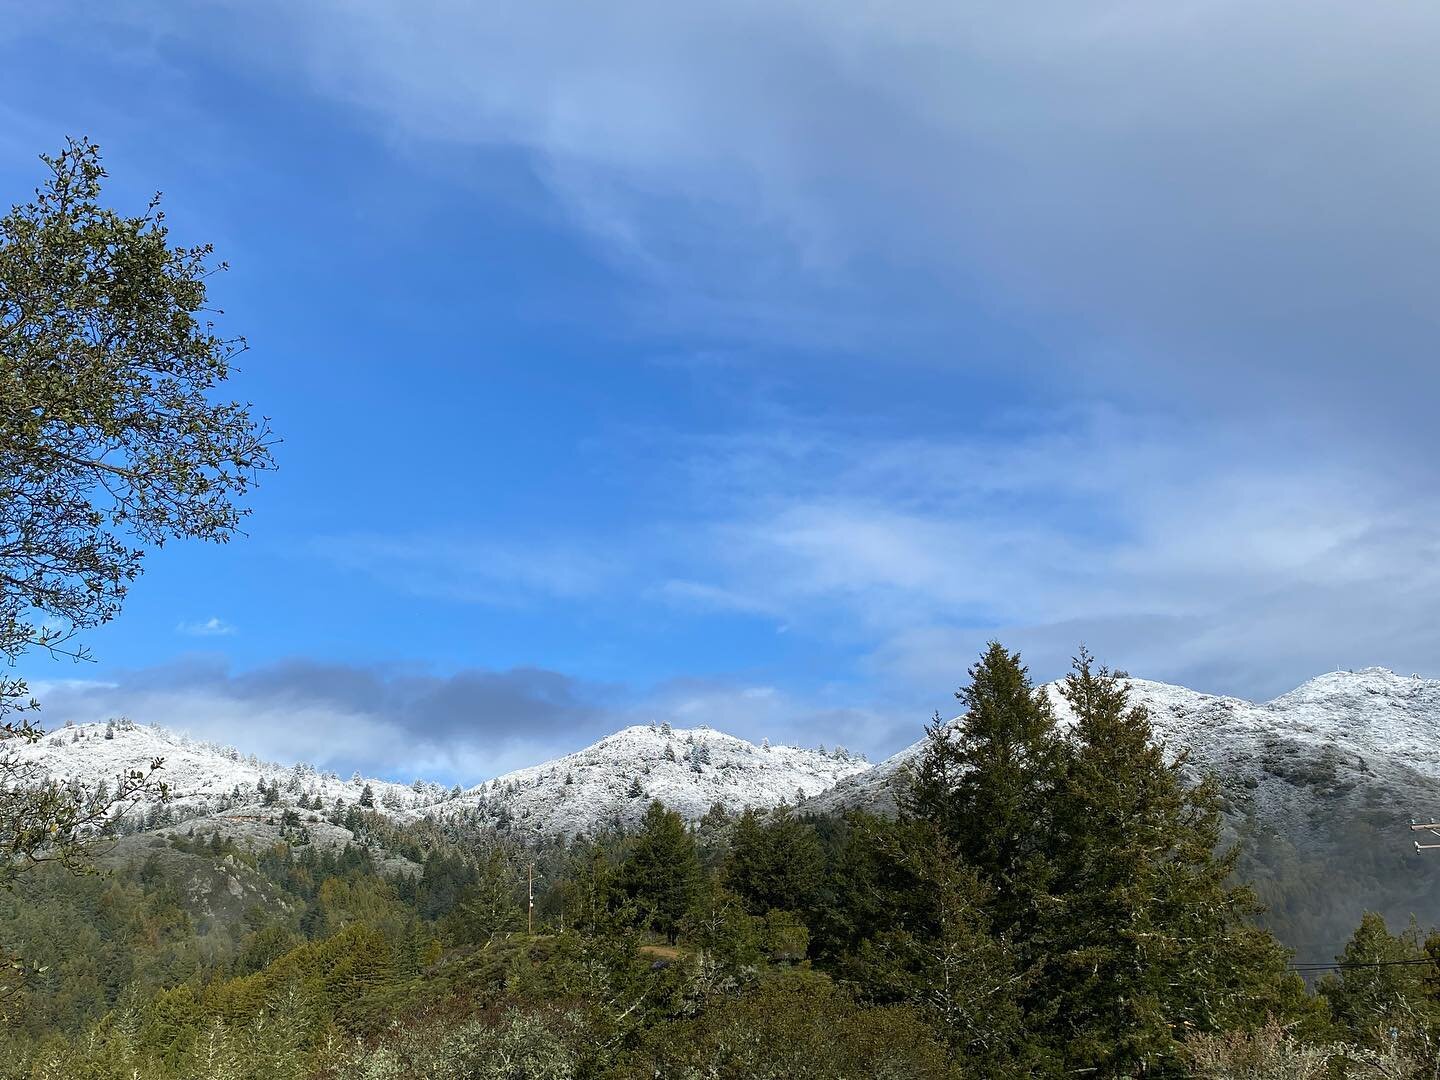 Snow on Mt. Tam! Got a few photos across from the Mountain Home Inn before the clouds and mist moved back in&hellip;. 

#millvalley #mounttamalpais #sfbayarea #snowonmounttam